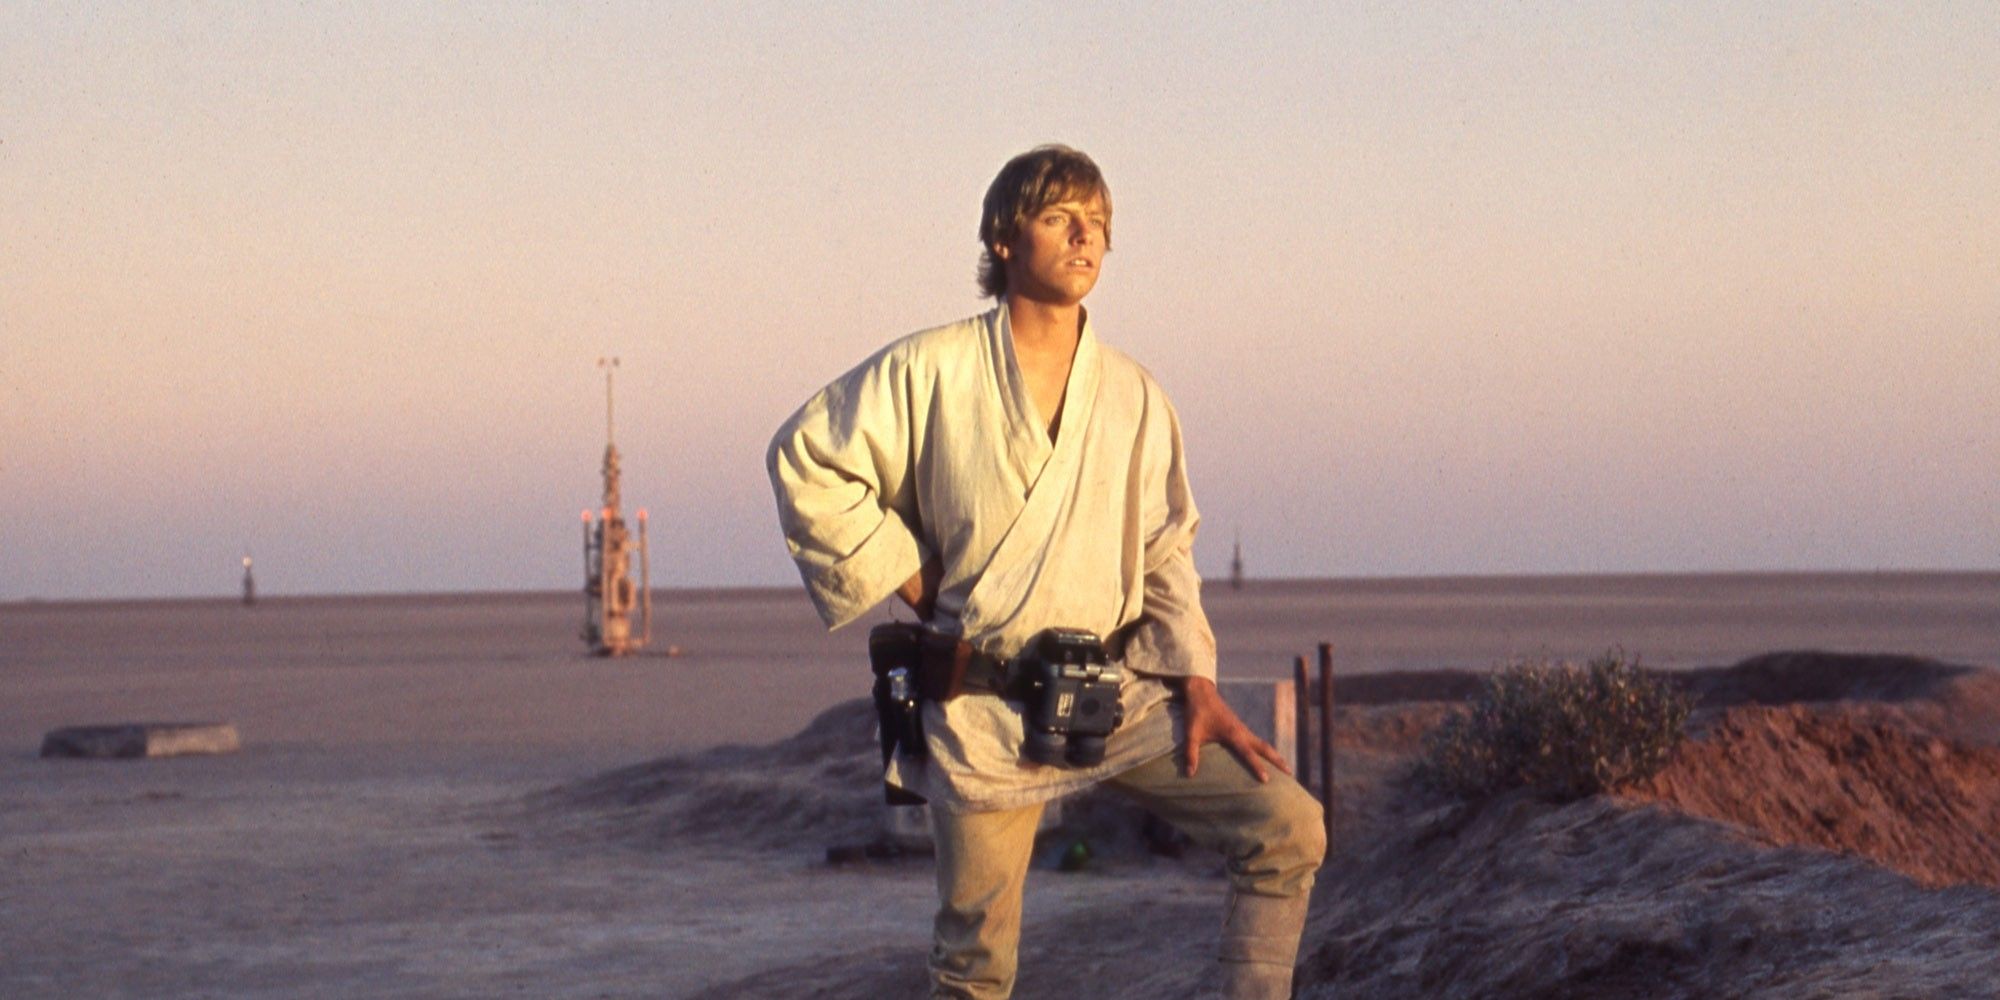 Luke Skywalker (Mark Hamill) looking to the distance in the desert planet of Tatooine in Star Wars: A New Hope.